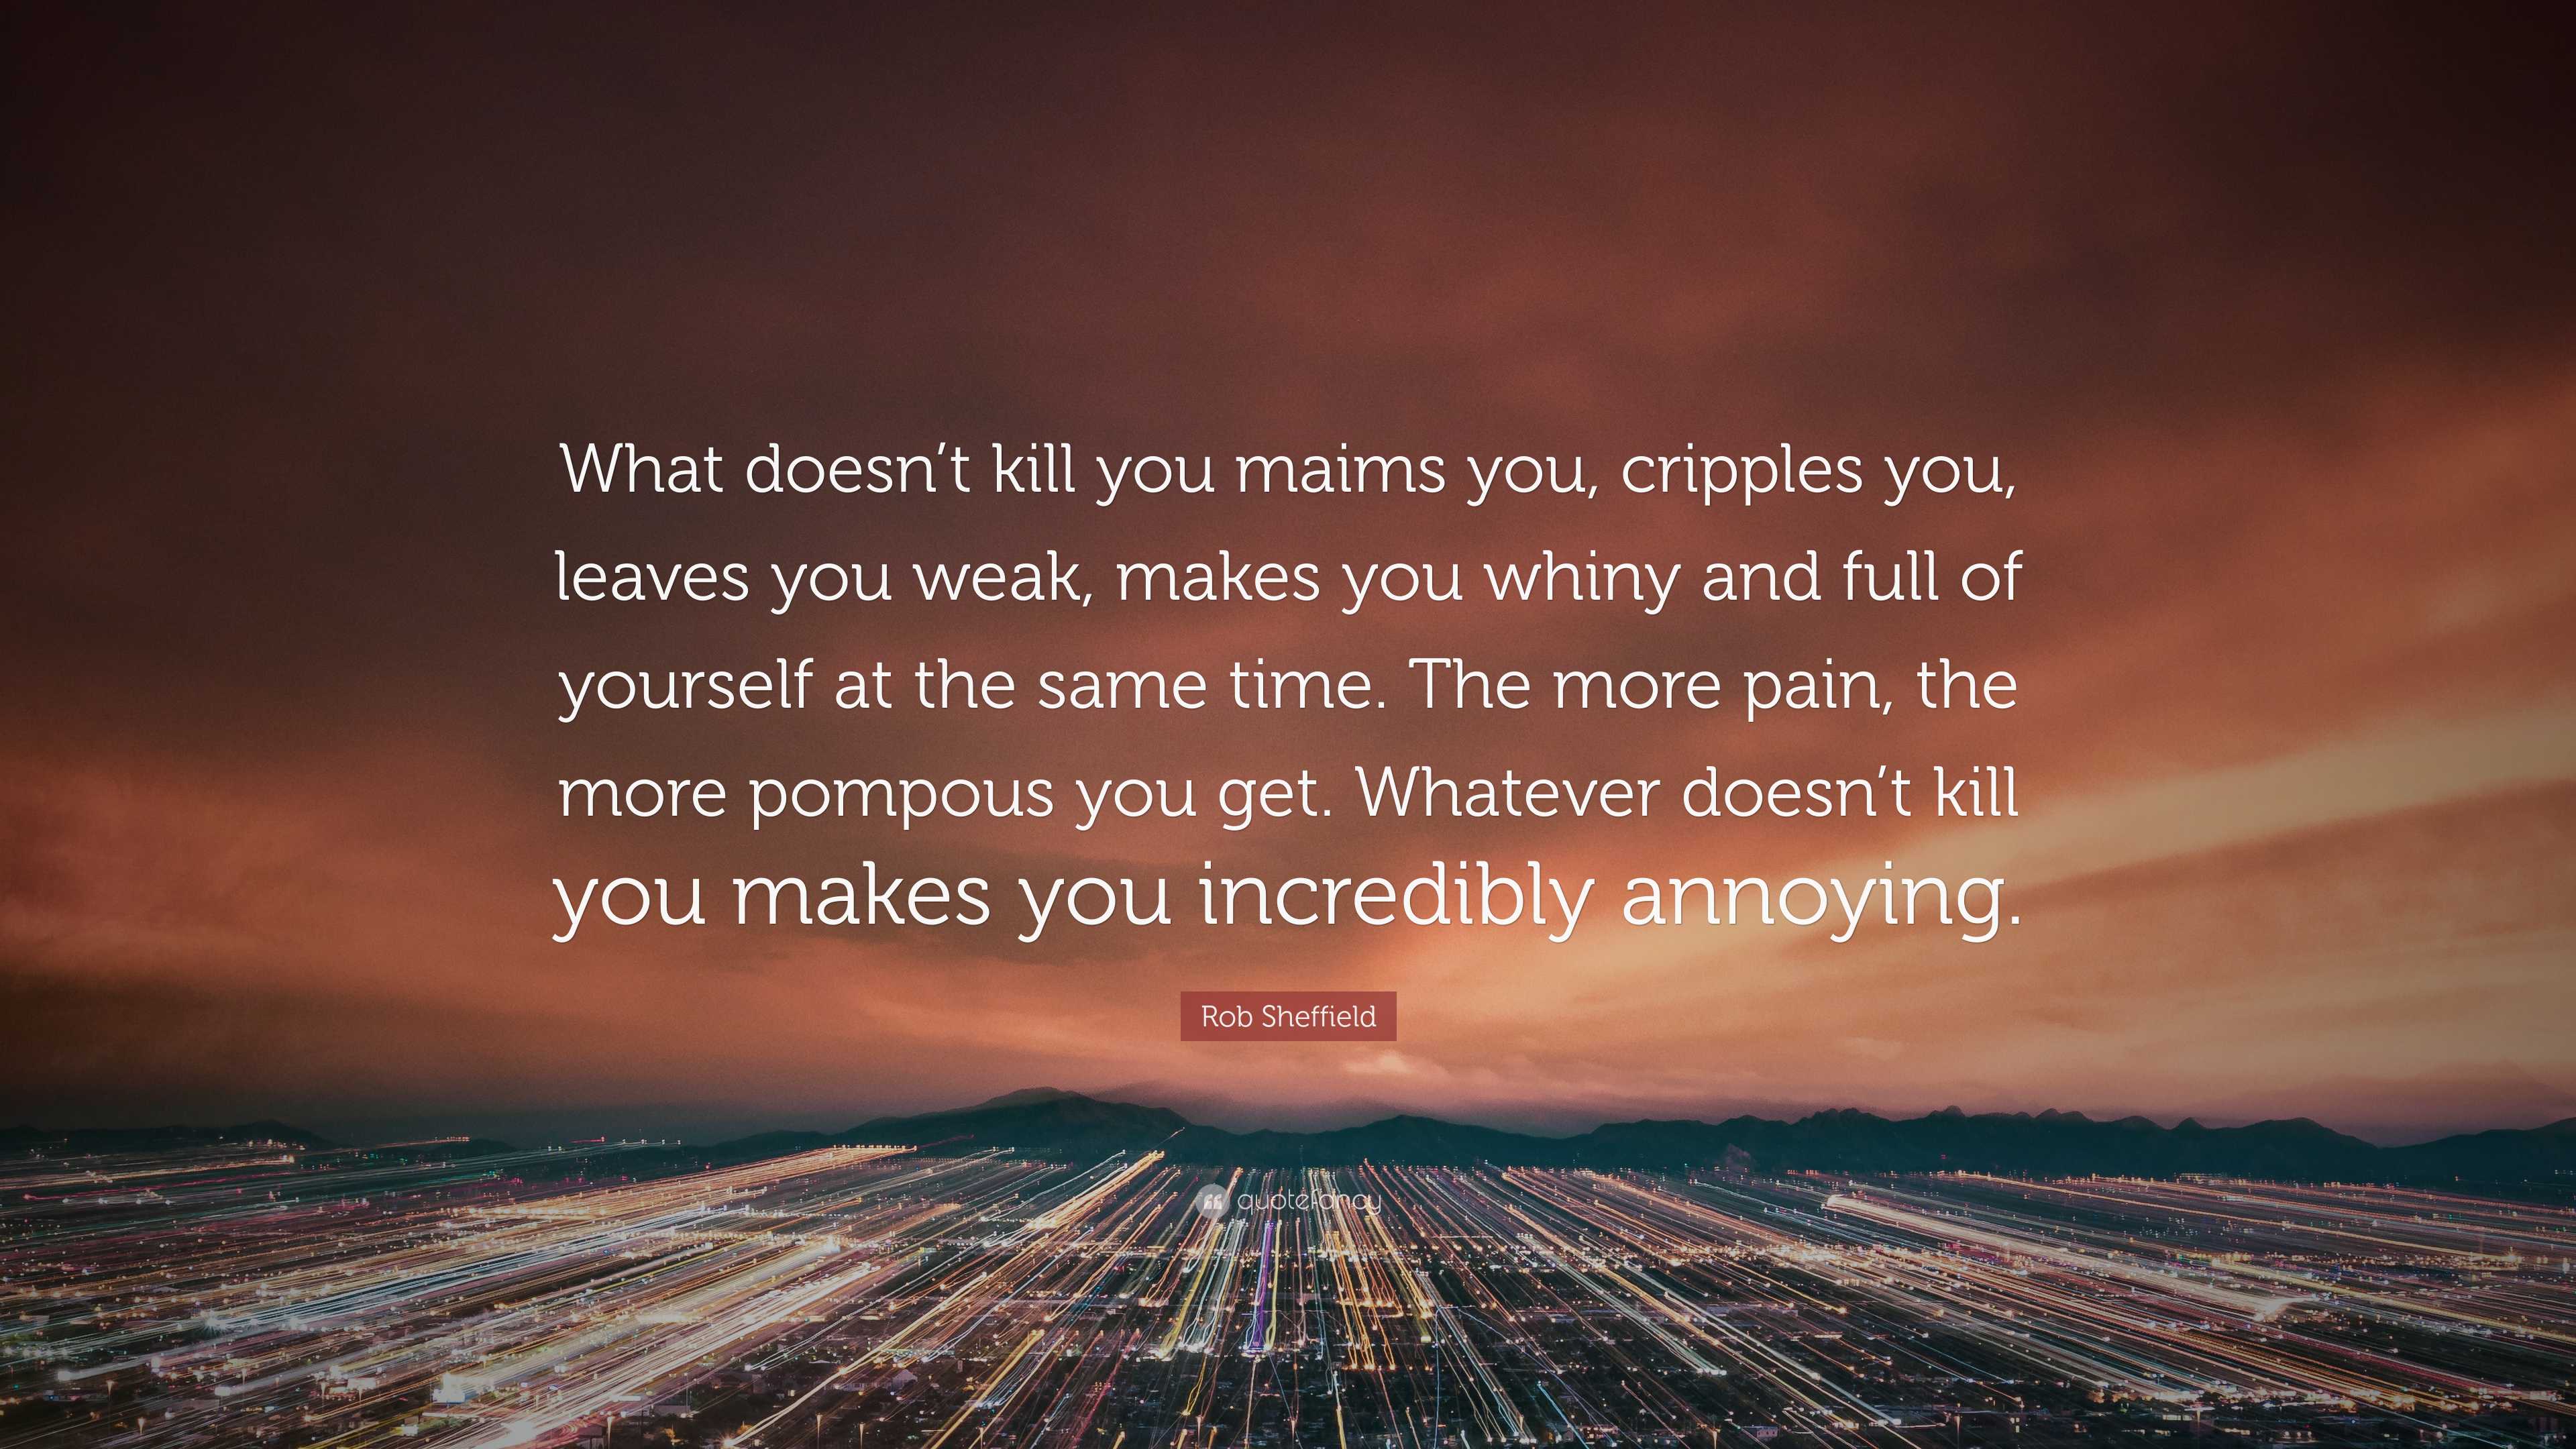 Rob Sheffield Quote: “What doesn’t kill you maims you, cripples you ...